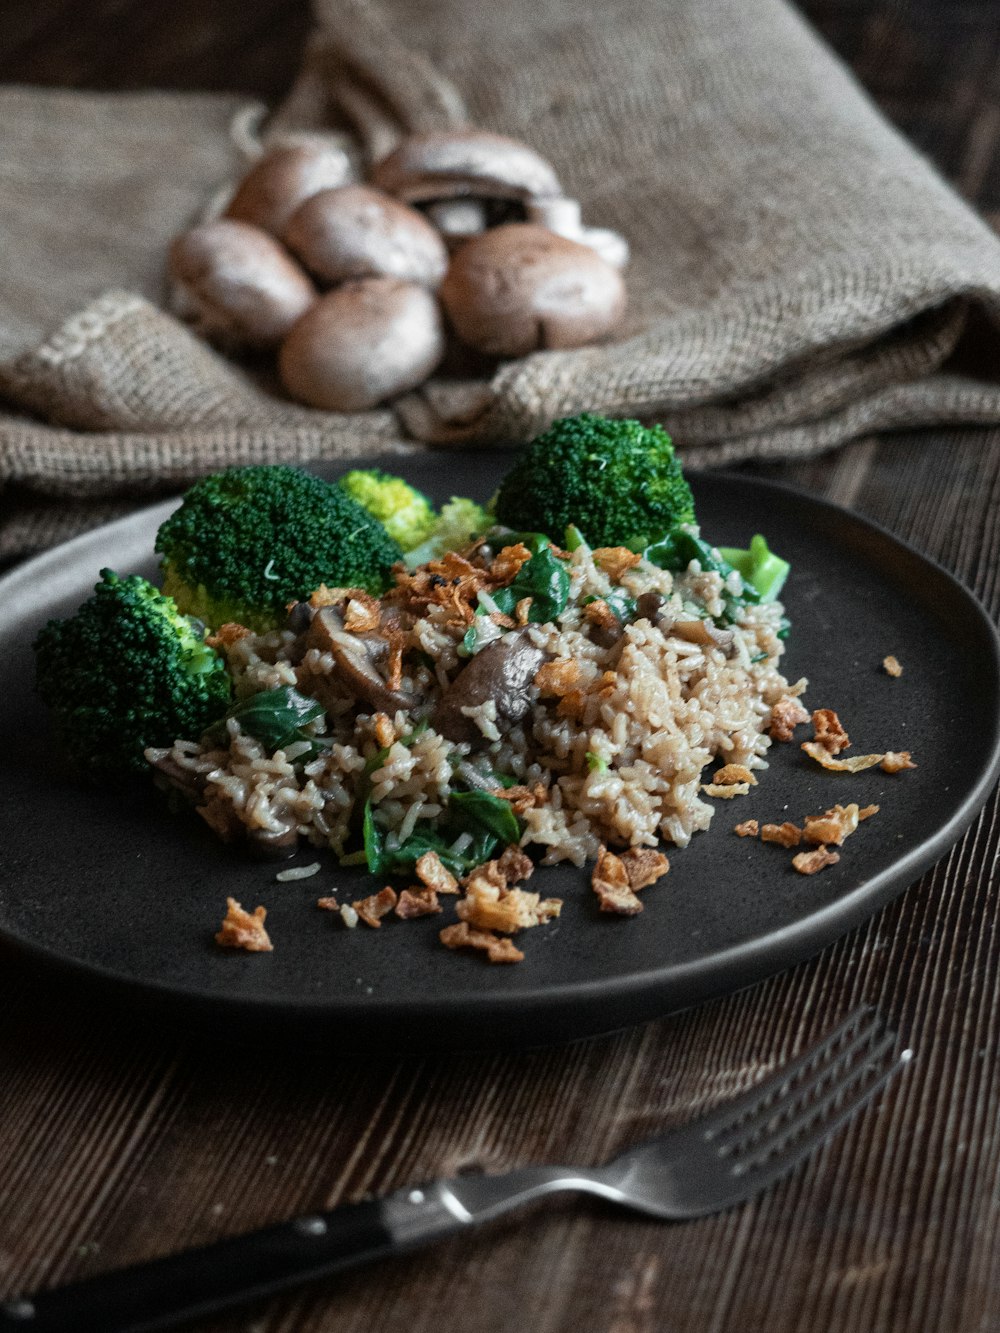 cooked rice with broccoli on black plate